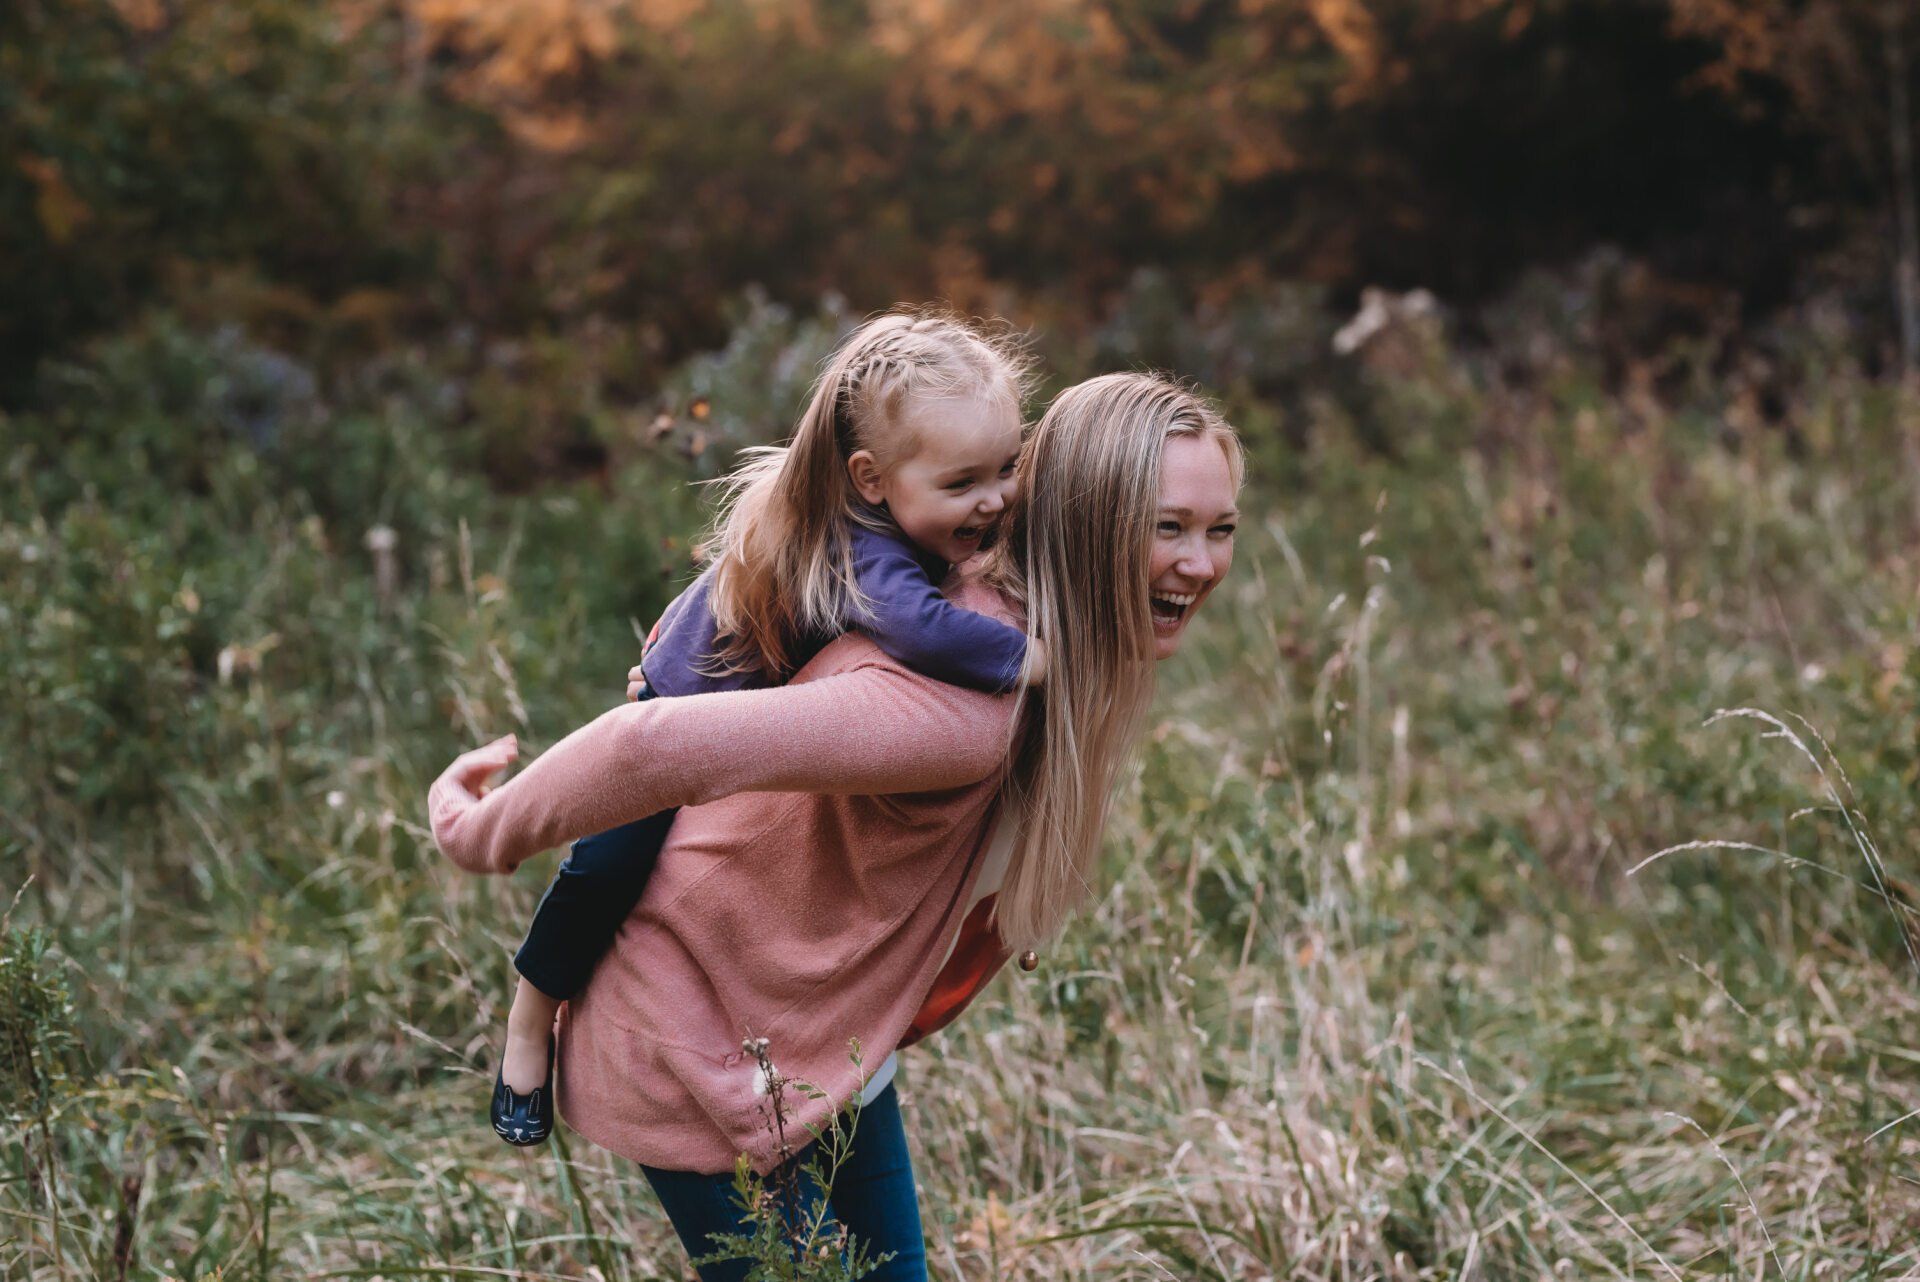 Older sister carrying younger sister on her back while standing in field for fall family photoshoot